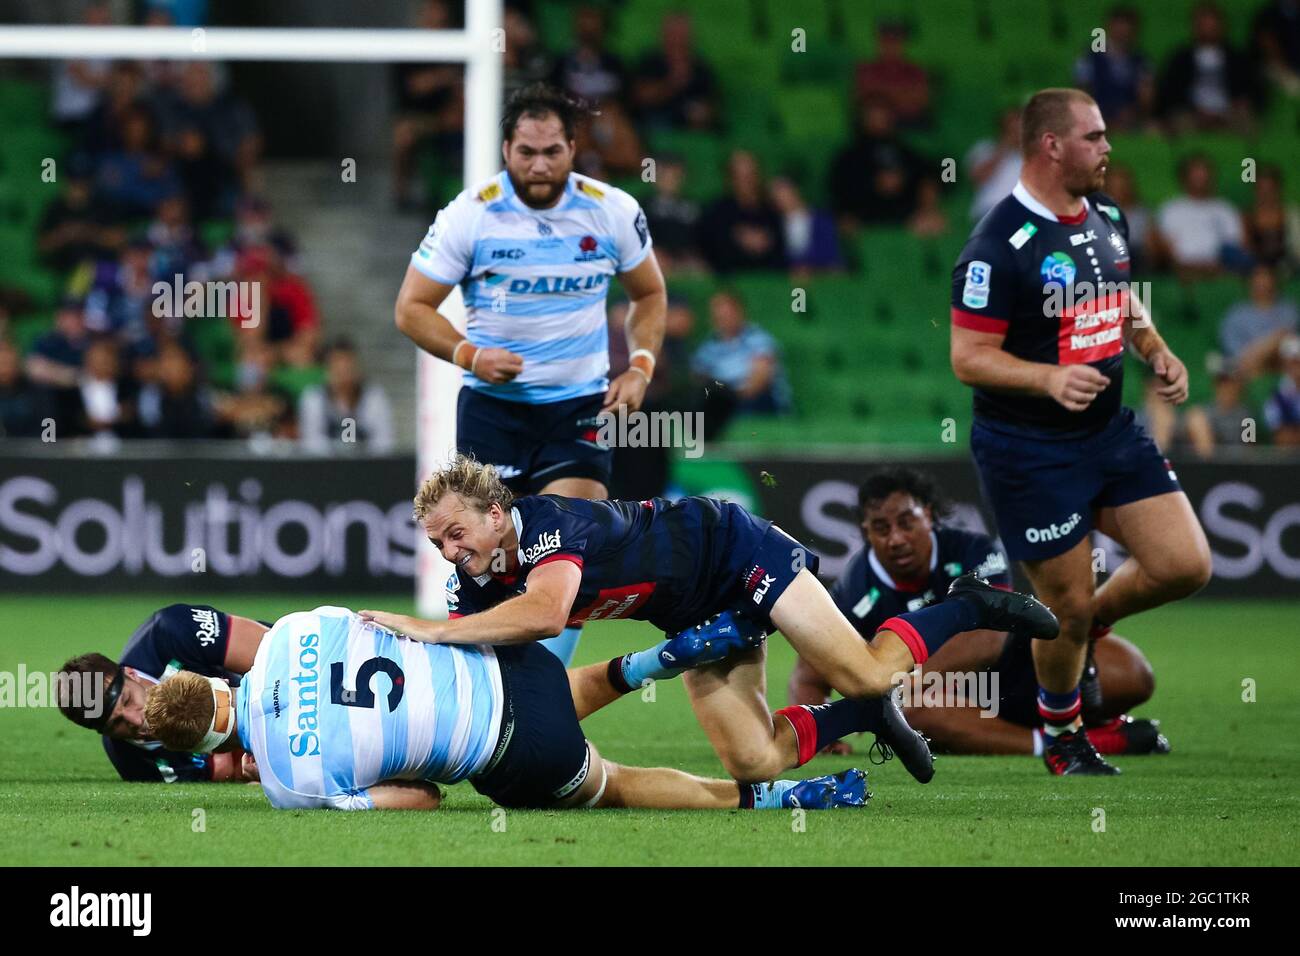 MELBOURNE, AUSTRALIA - MARCH 19: Joe Powell of the Melbourne Rebels during the round 5 Super Rugby match between the Melbourne Rebels and NSW Waratahs at AAMI Park on March 19, 2021 in Melbourne, Australia.  Credit: Dave Hewison/Speed Media/Alamy Live News Stock Photo